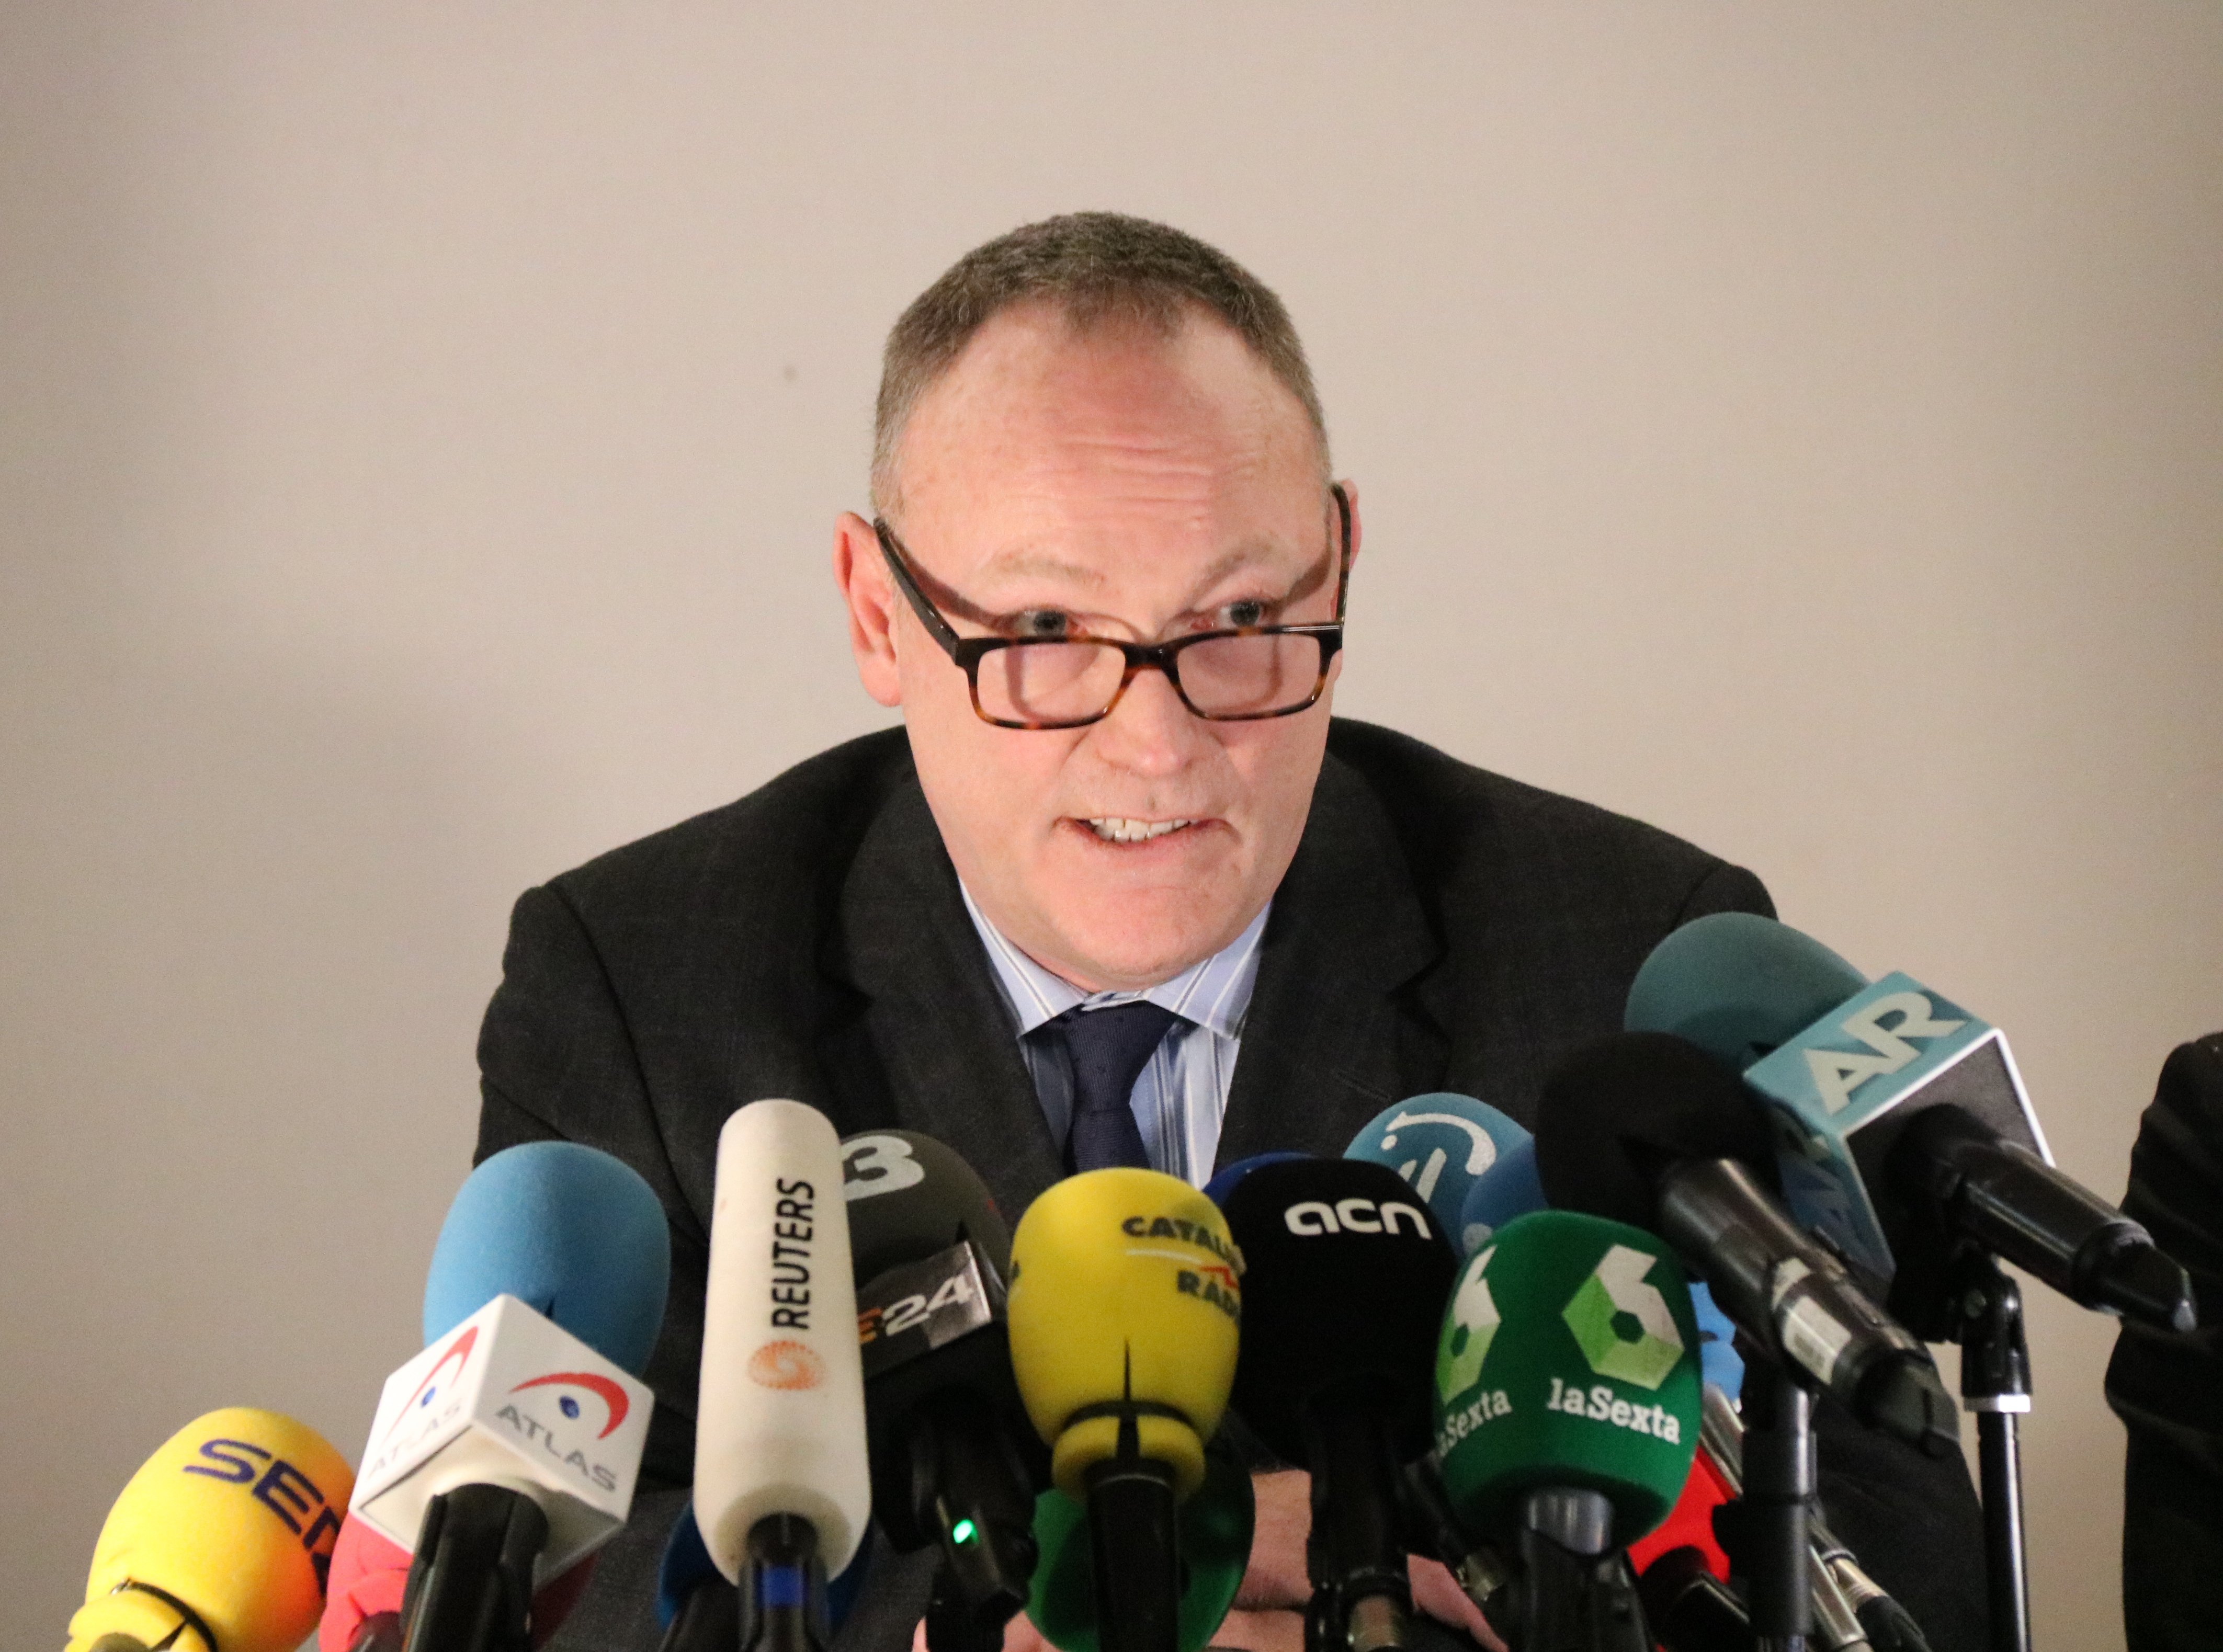 Lawyer Emmerson asks UN to investigate Spanish government